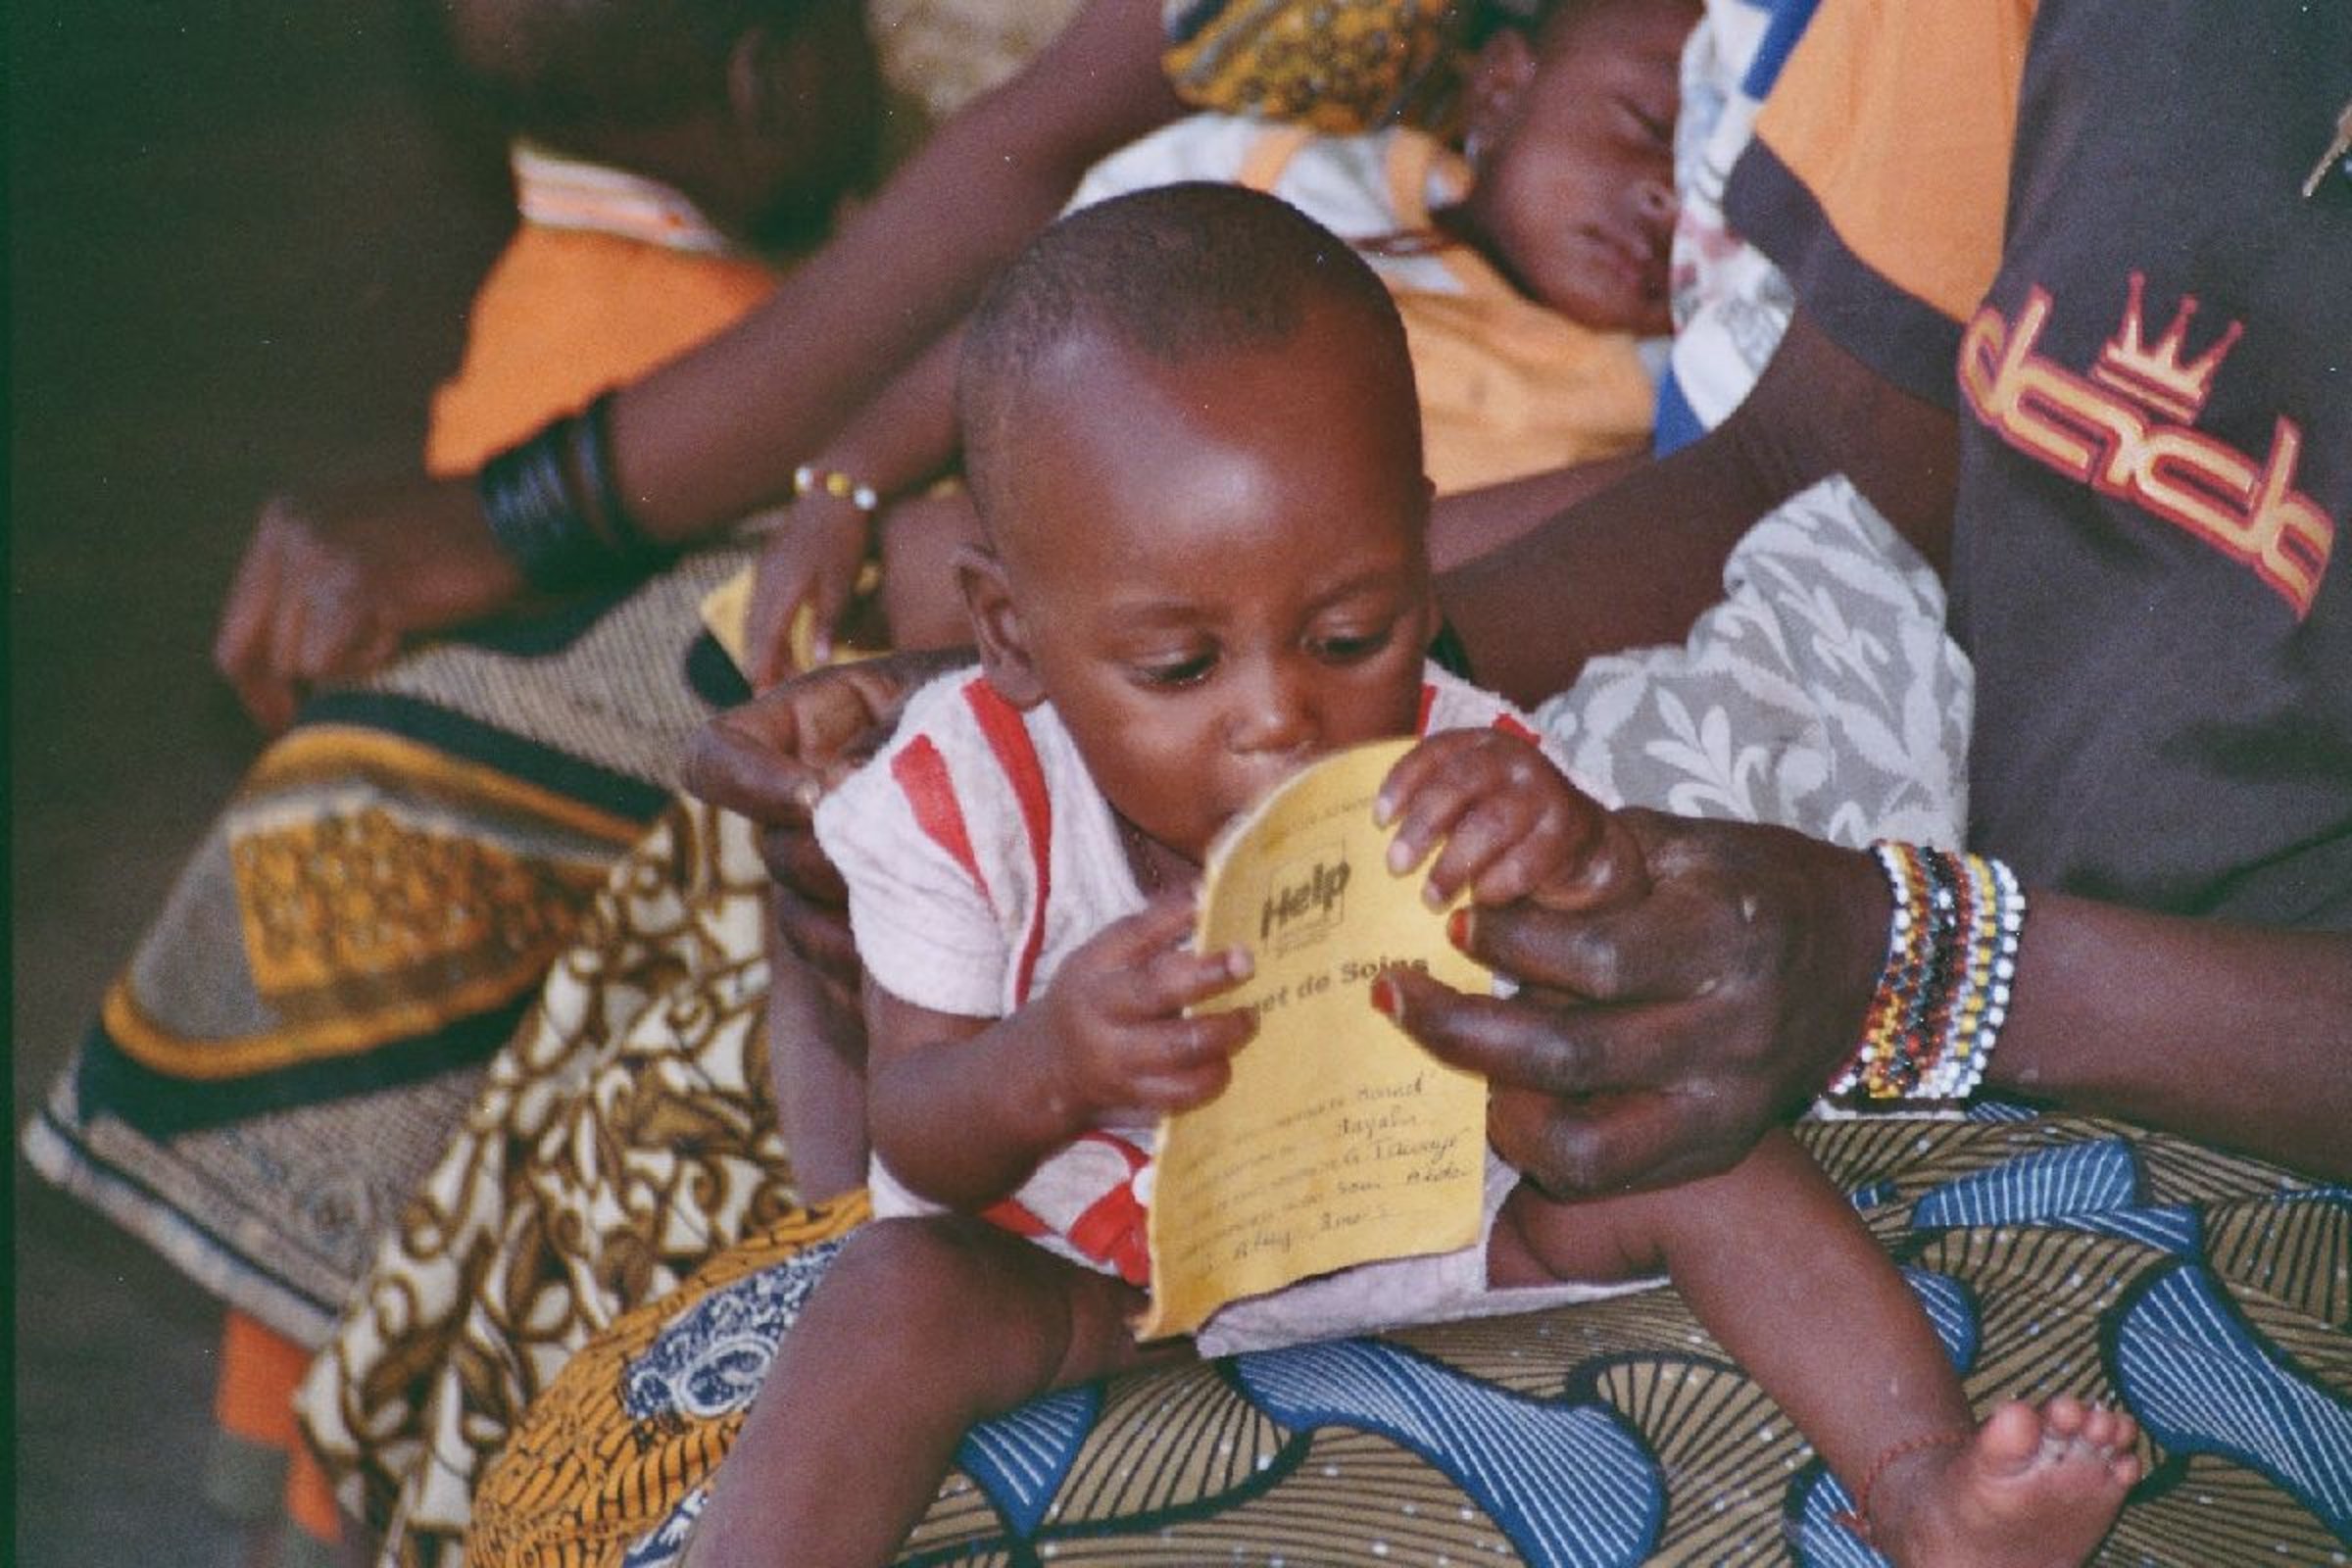 Medical treatment of children in Niger